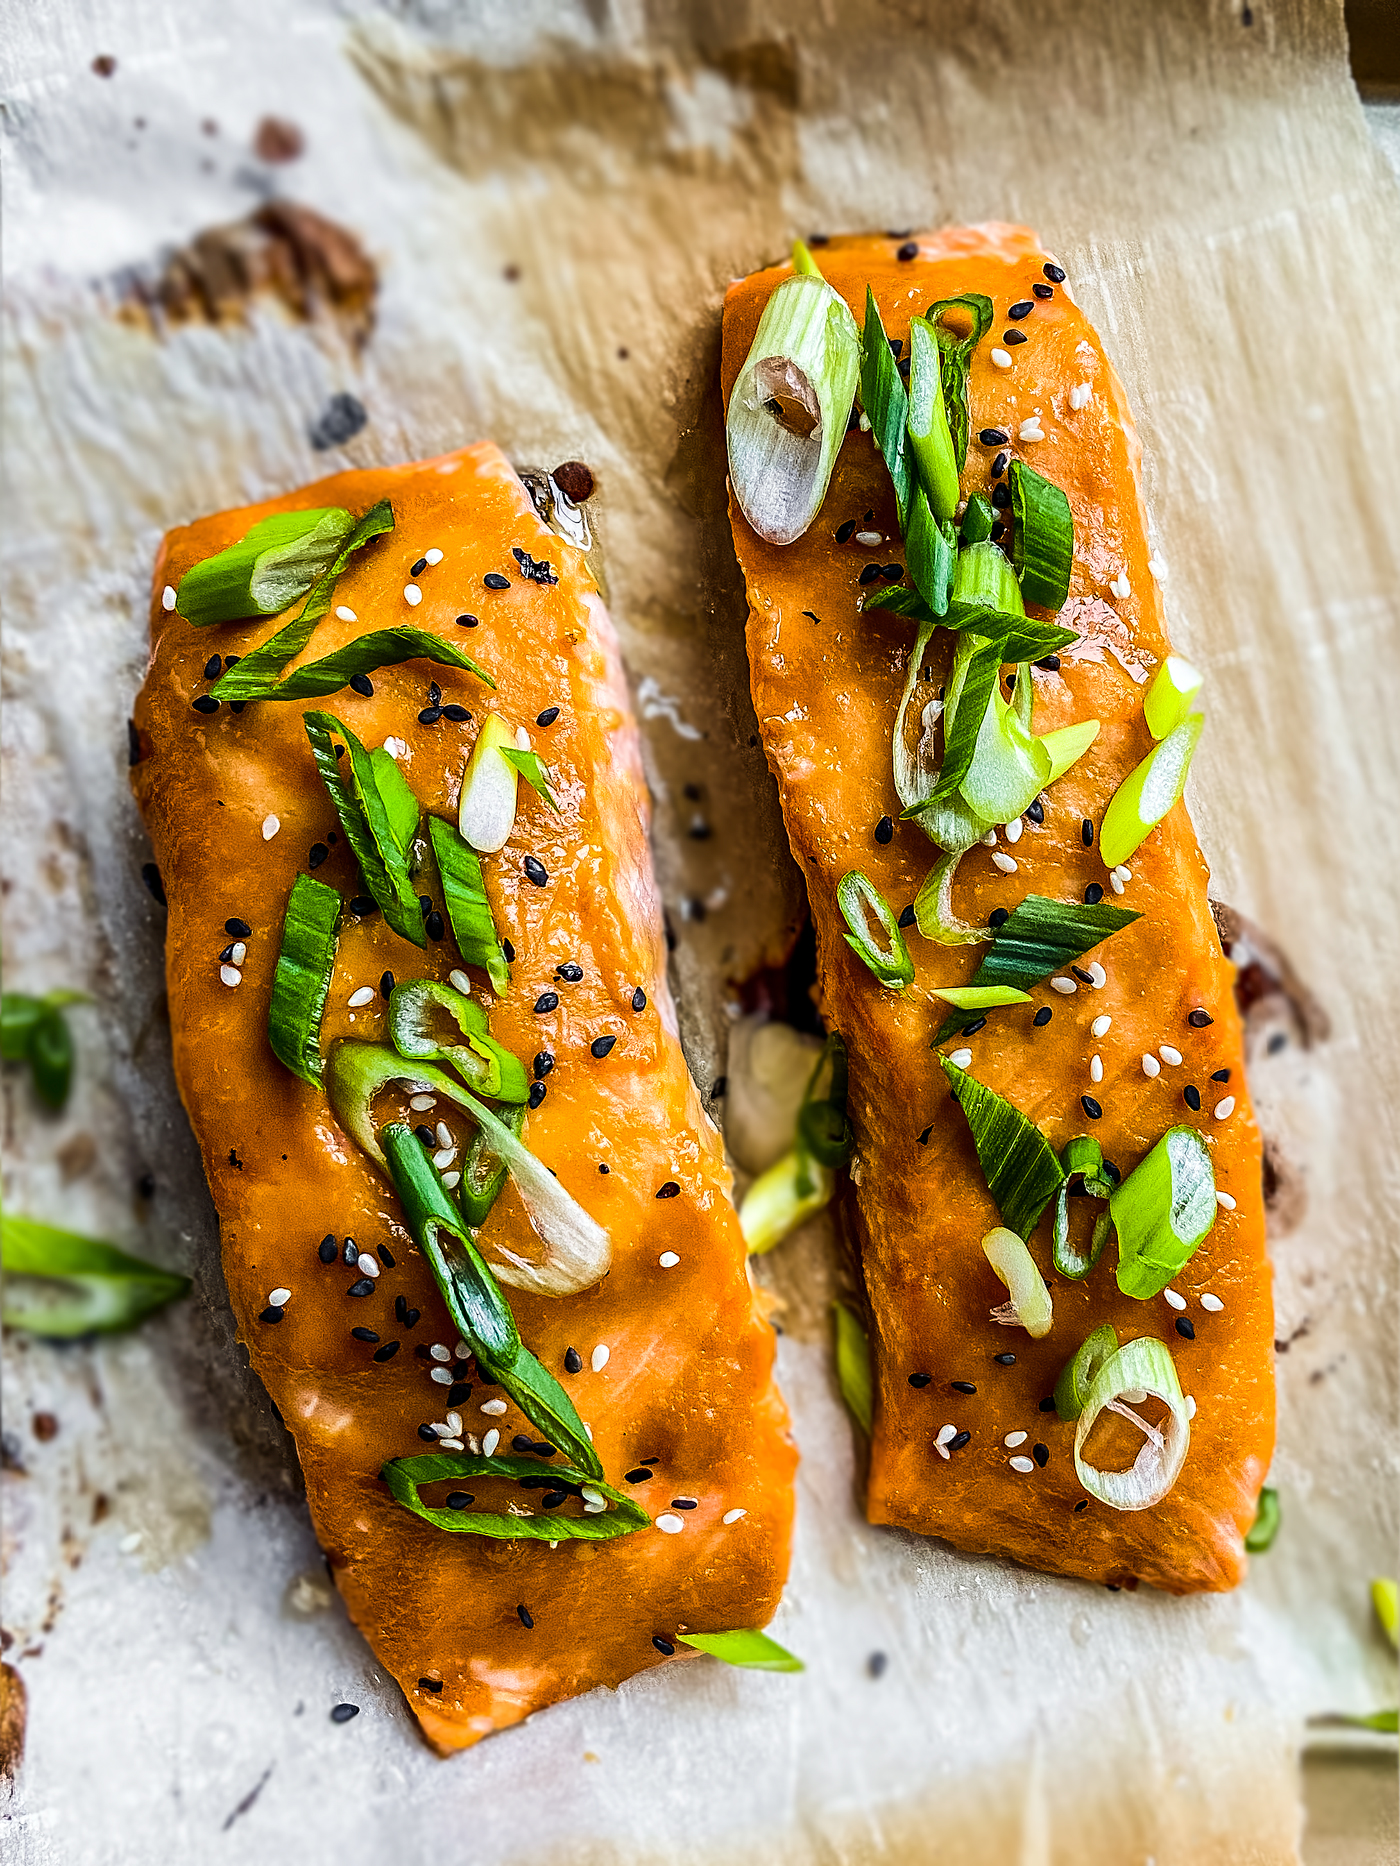 Two fillets of salmon glazed with miso and garnished with sesame seeds and scallions.